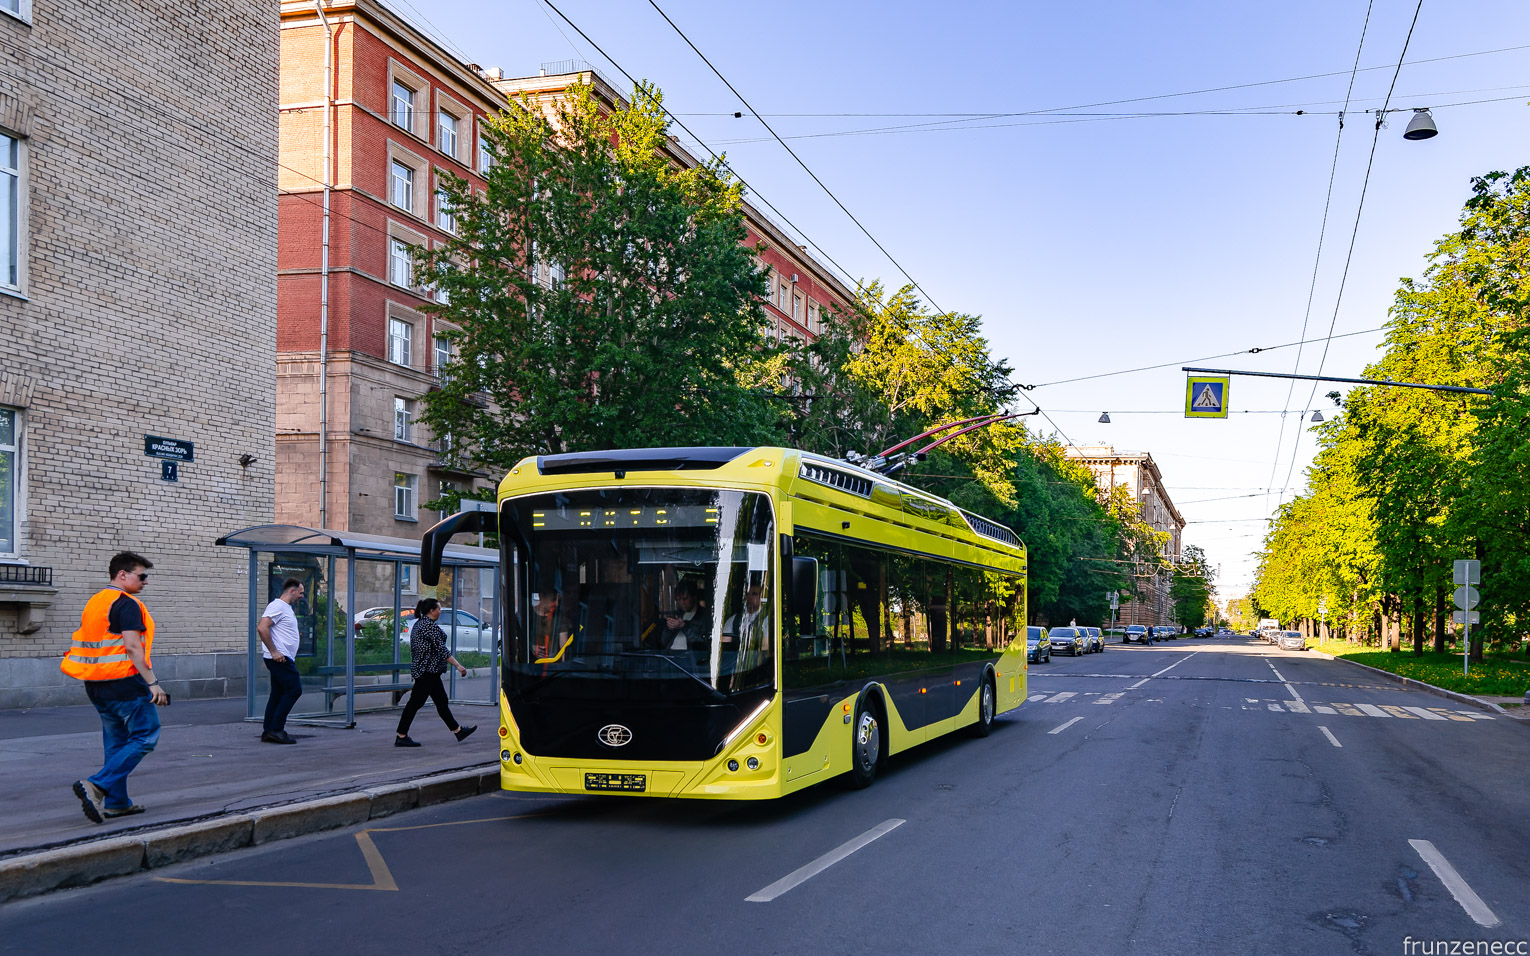 Engels, PKTS-62181 "General" nr. Б/н-1; St Petersburg — Running-in of the PKTS-62181 "General" electric bus in the city — 05/20/2023 — 05/21/2023